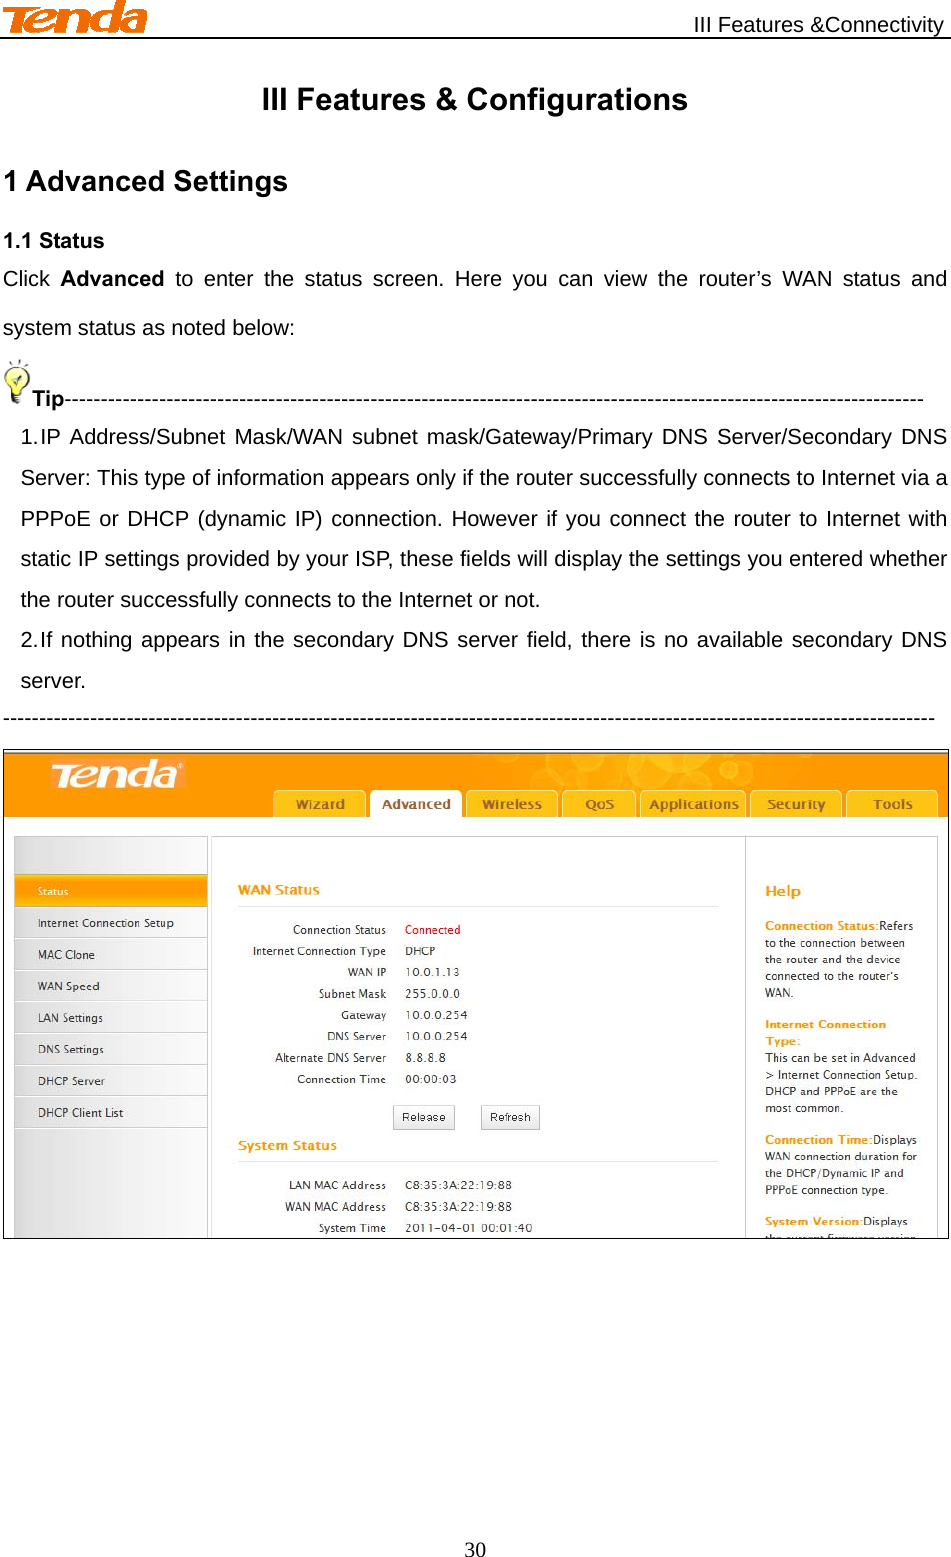                                                   III Features &amp;Connectivity 30 III Features &amp; Configurations 1 Advanced Settings 1.1 Status Click  Advanced to enter the status screen. Here you can view the router’s WAN status and system status as noted below: Tip---------------------------------------------------------------------------------------------------------------------- 1. IP Address/Subnet Mask/WAN subnet mask/Gateway/Primary DNS Server/Secondary DNS Server: This type of information appears only if the router successfully connects to Internet via a PPPoE or DHCP (dynamic IP) connection. However if you connect the router to Internet with static IP settings provided by your ISP, these fields will display the settings you entered whether the router successfully connects to the Internet or not. 2. If nothing appears in the secondary DNS server field, there is no available secondary DNS server. --------------------------------------------------------------------------------------------------------------------------------  